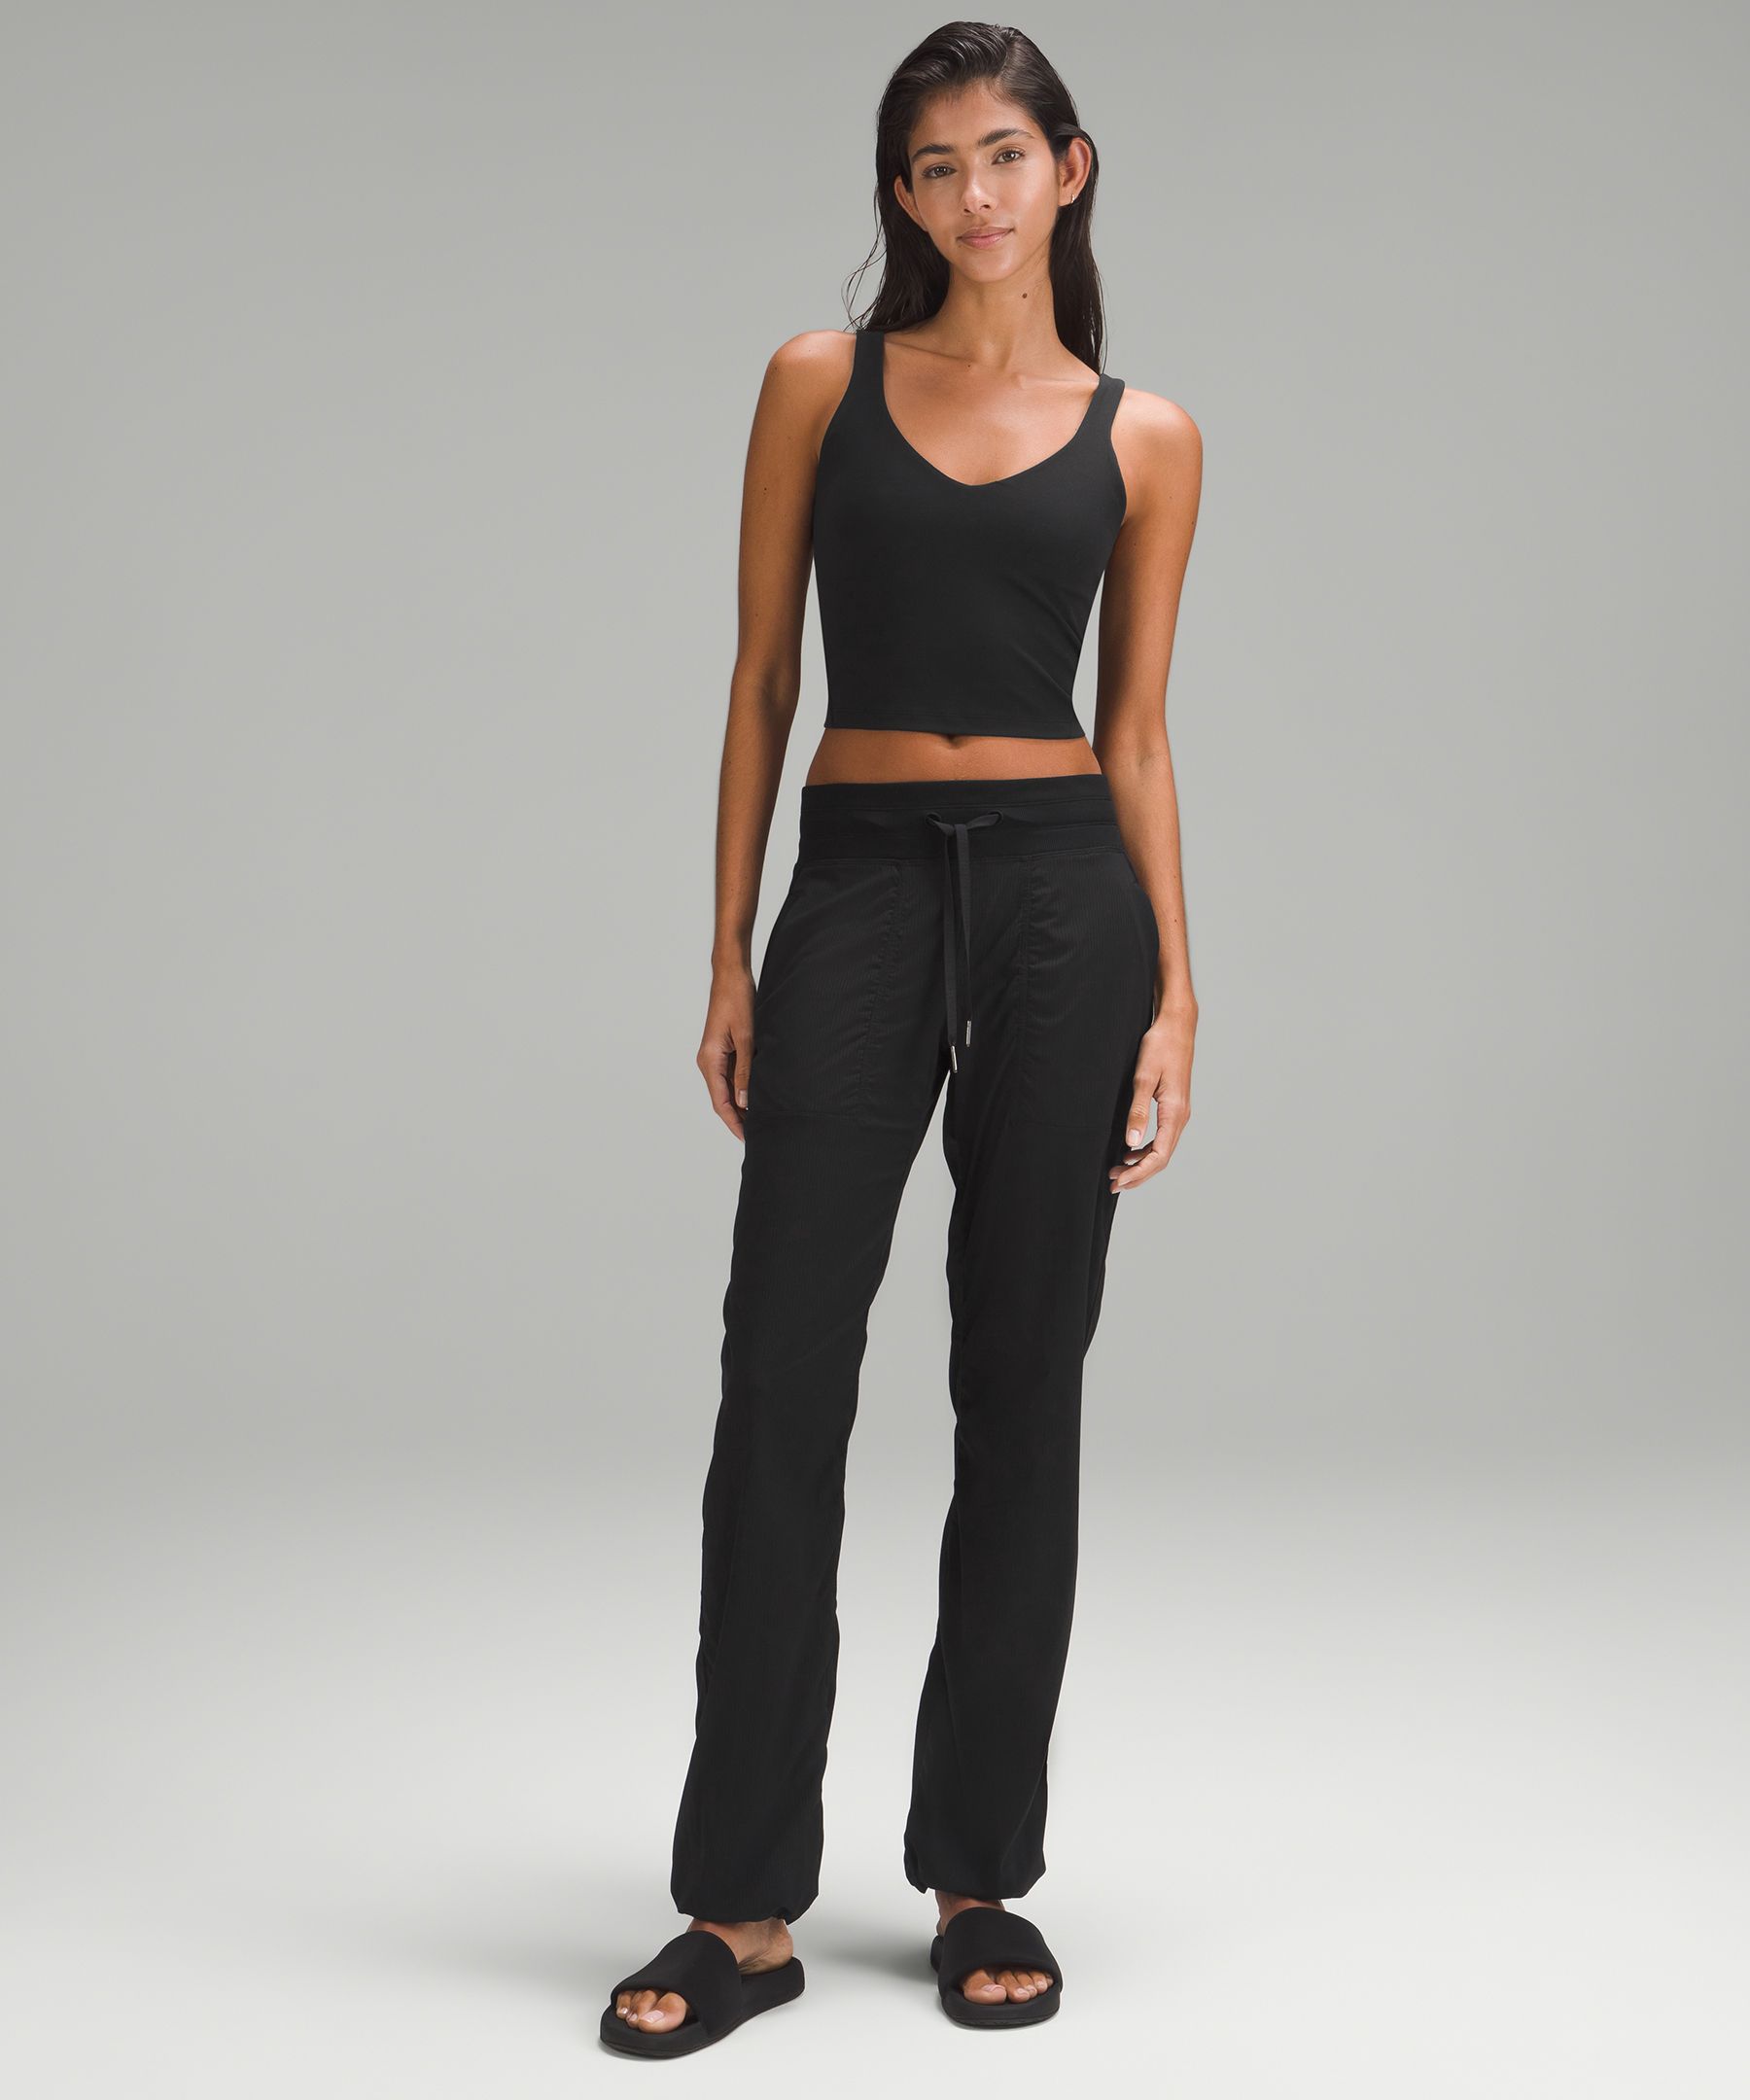 Fit pic: align tank (rustic coral, 8) and noir pants (dark olive